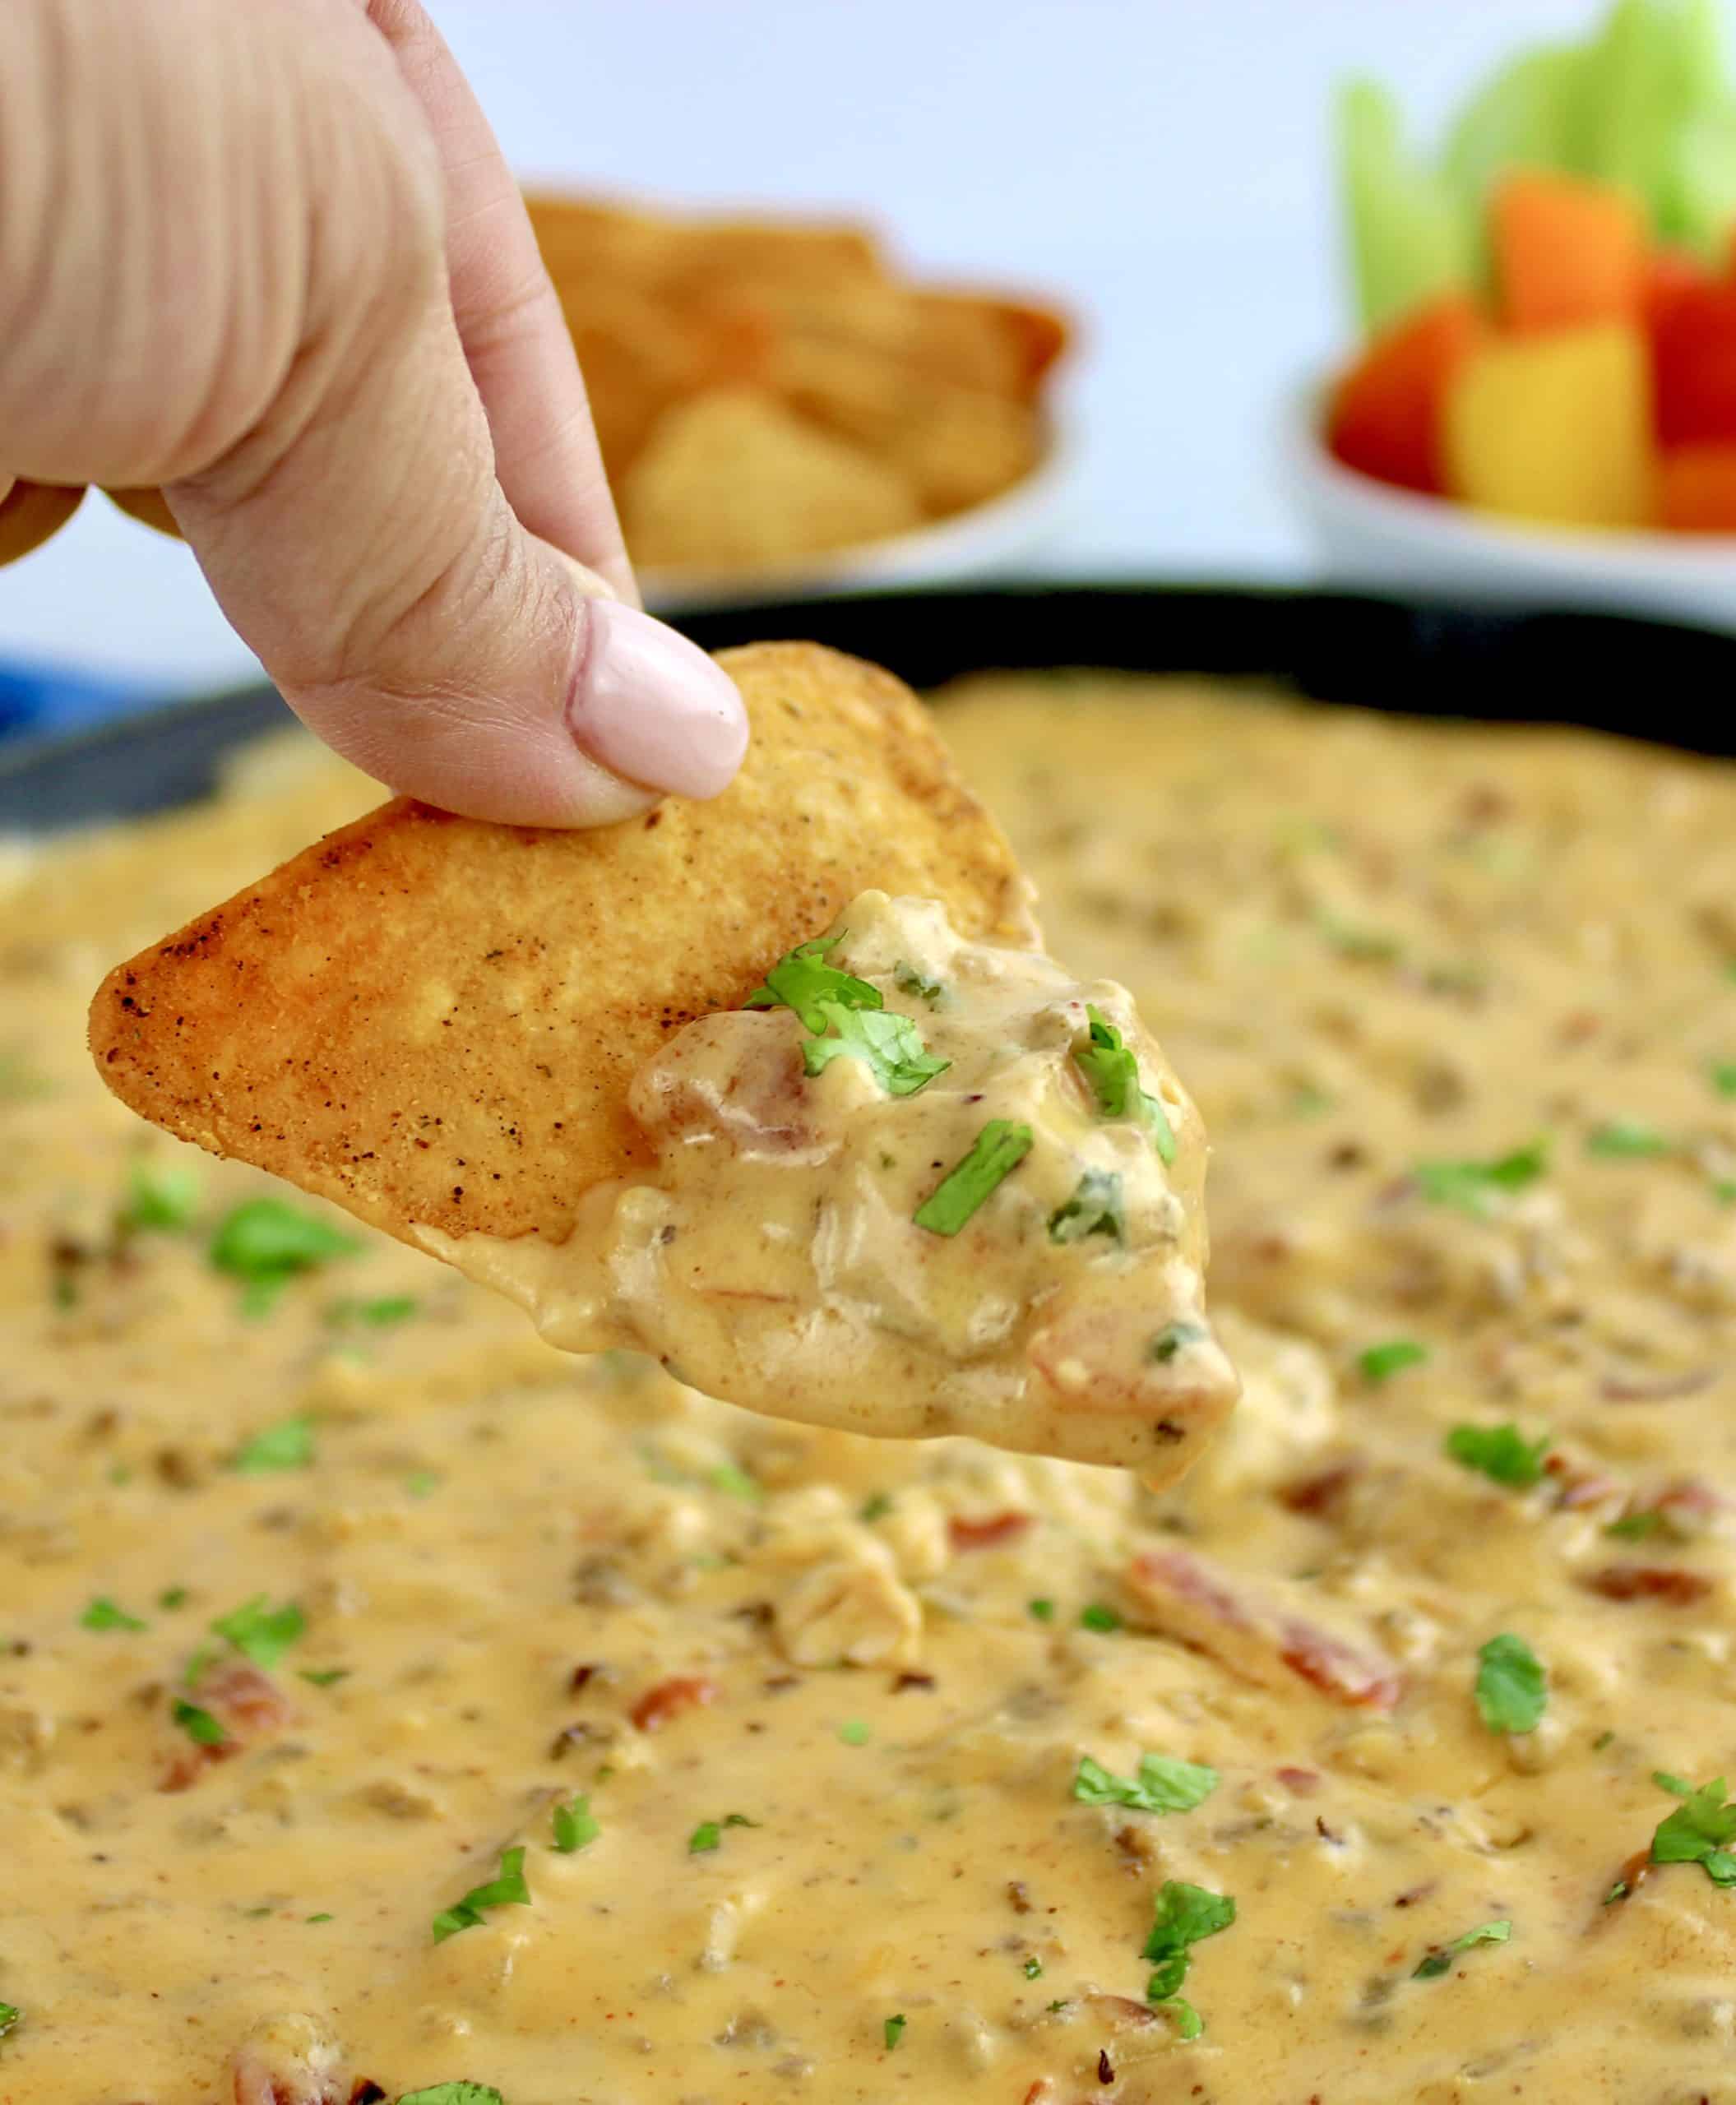 tortilla chip being dipped into Sausage Rotel Dip